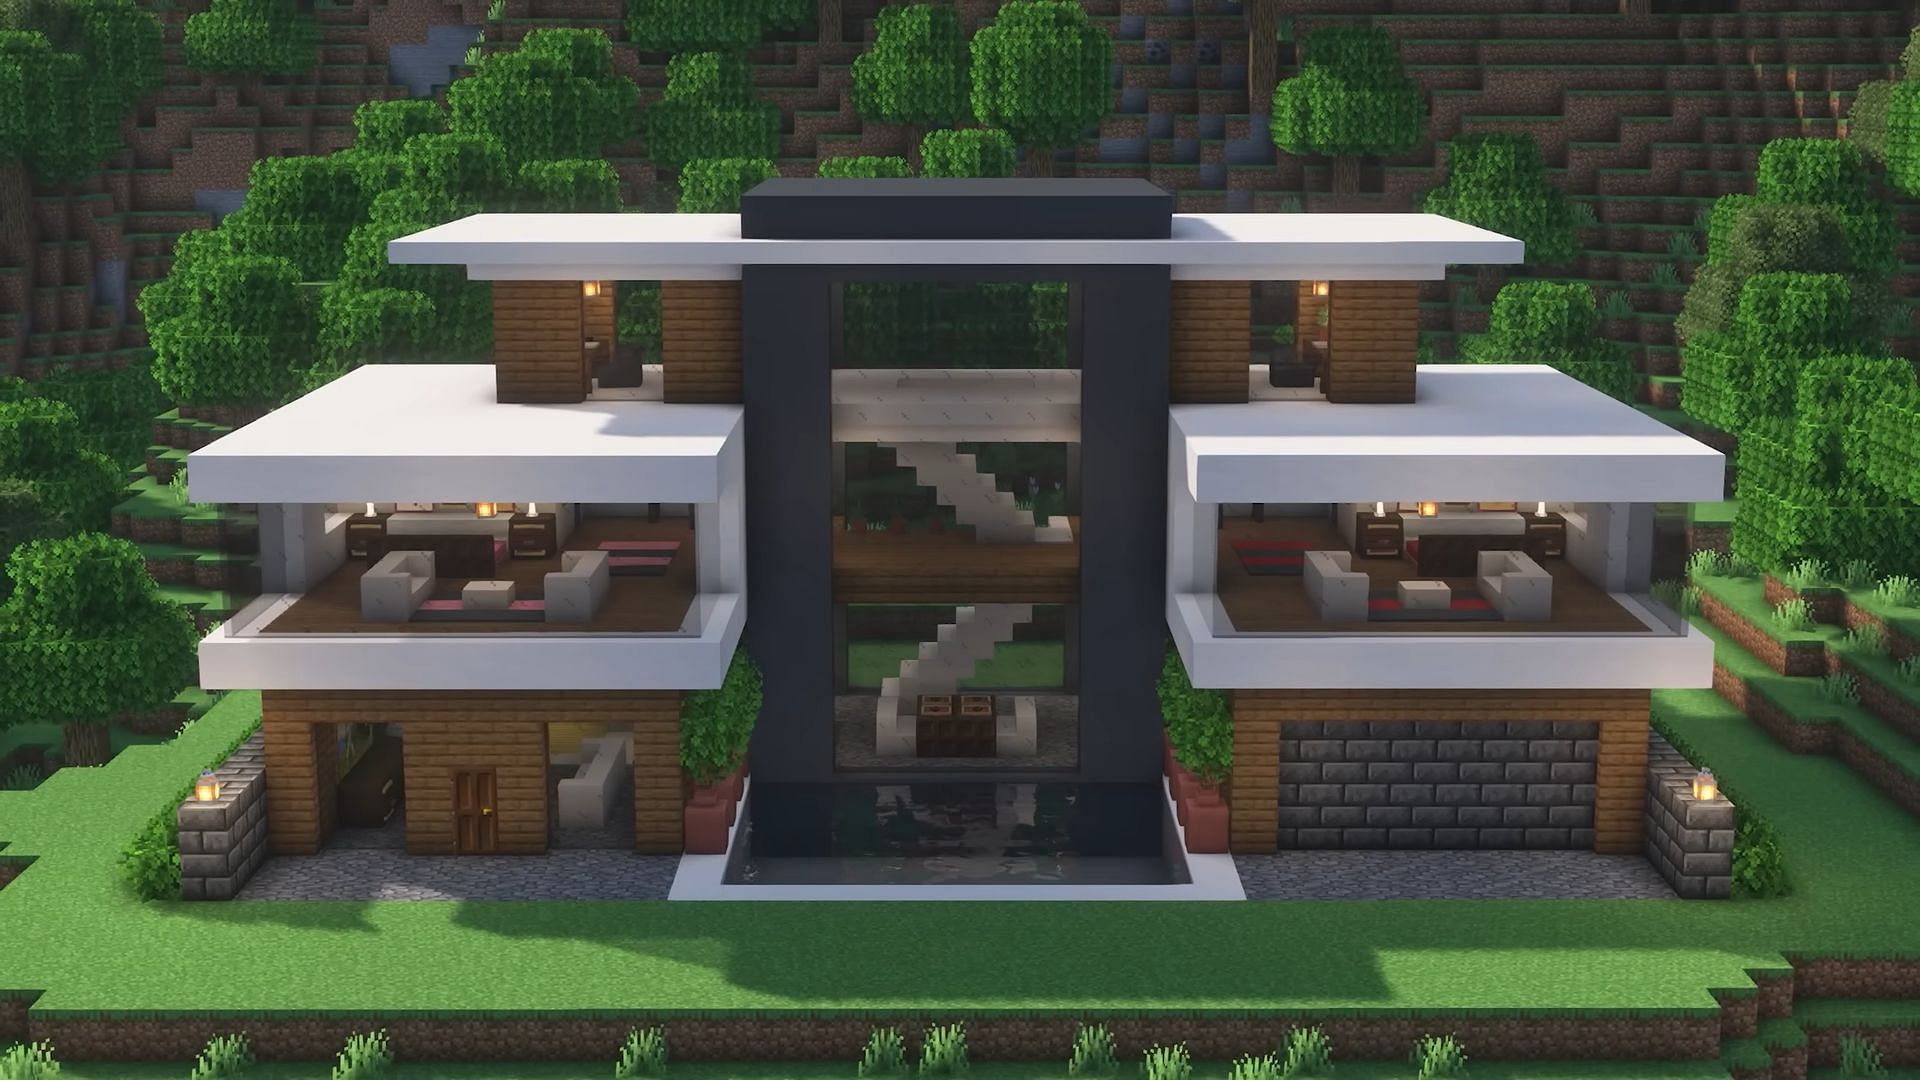 A modern mansion (Image via YouTube/Rizzial)